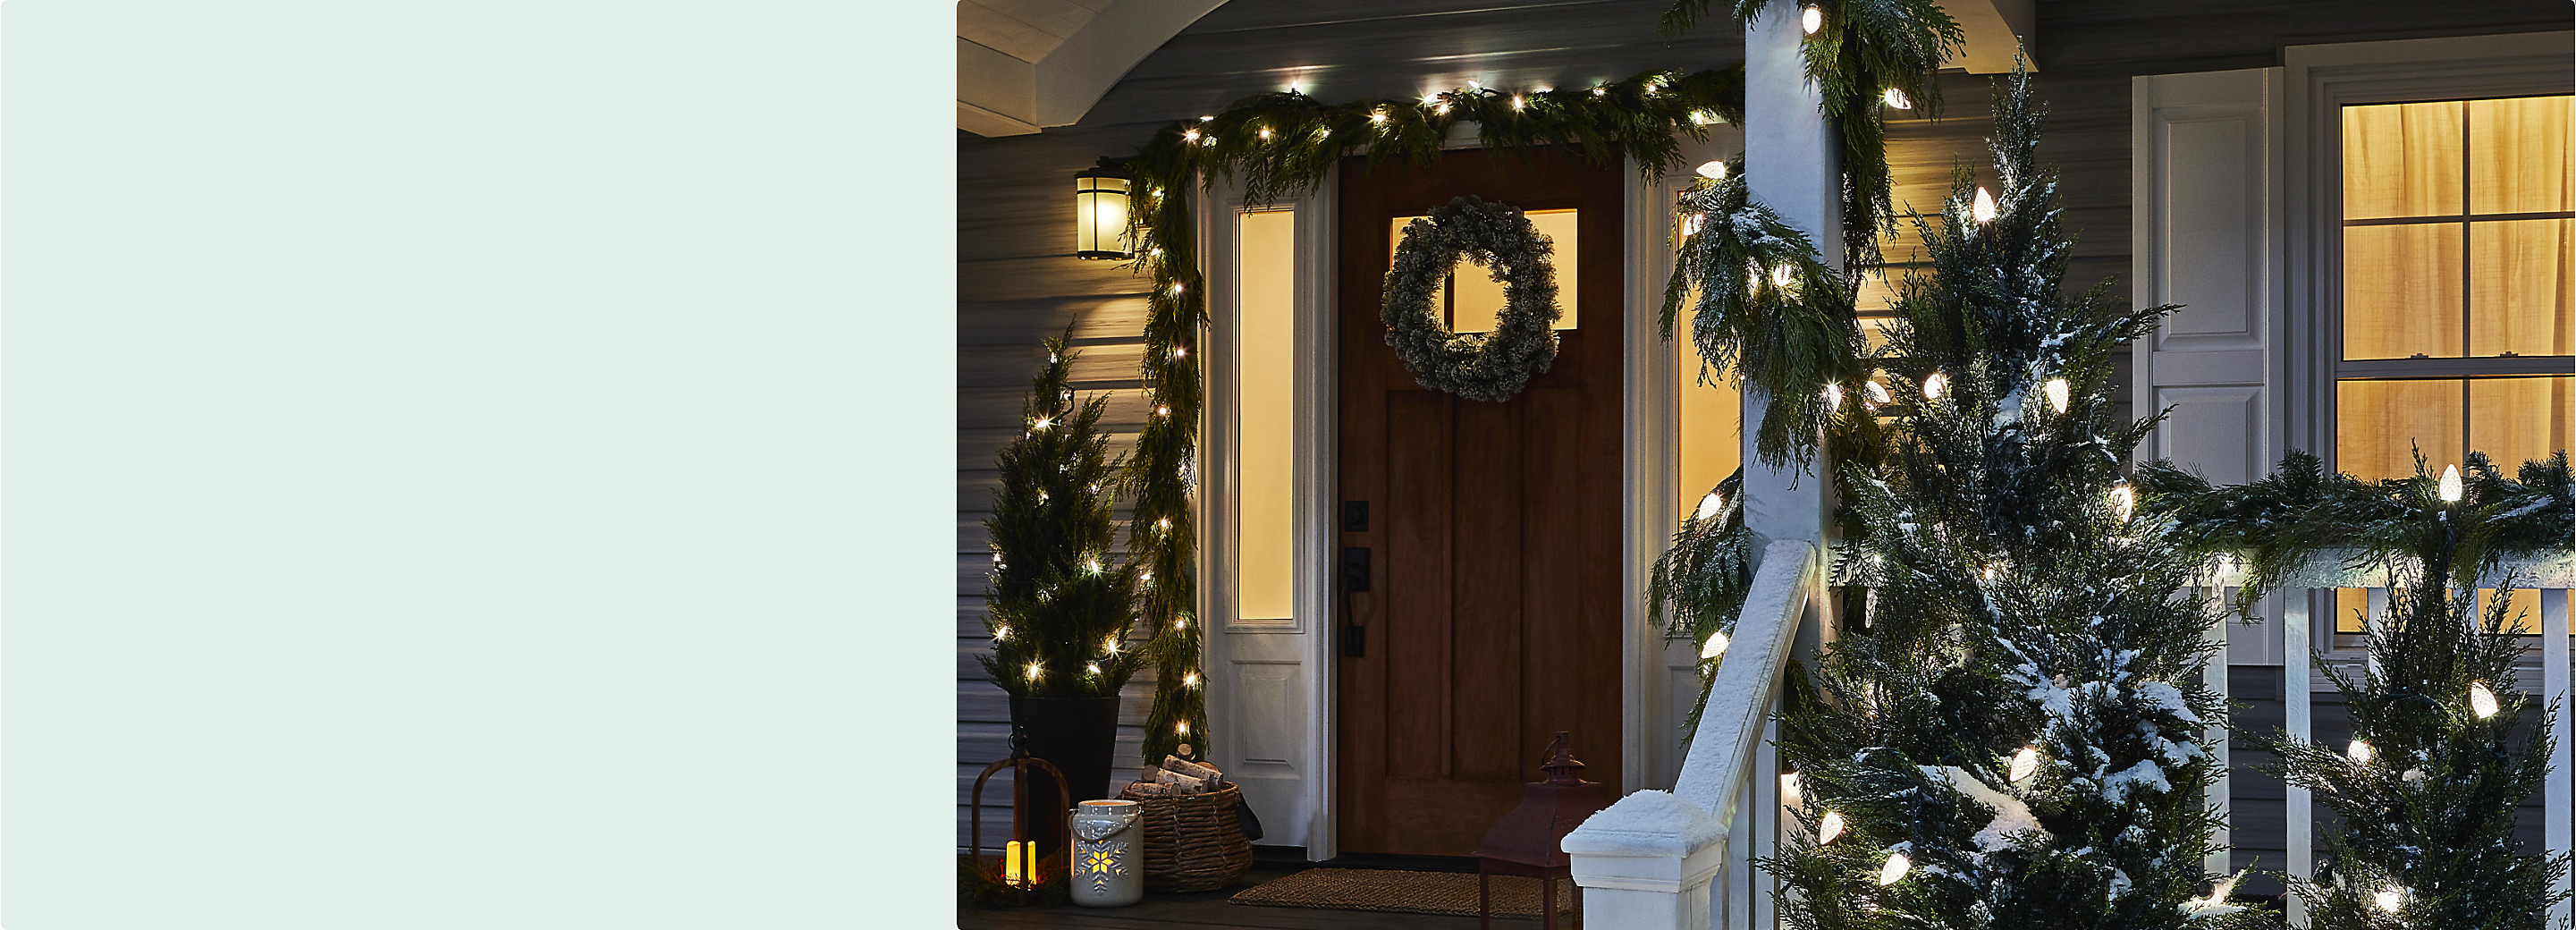 A front porch of a house decorated with white outdoor lights, green Christmas garland and a wreath hung on the front door. 